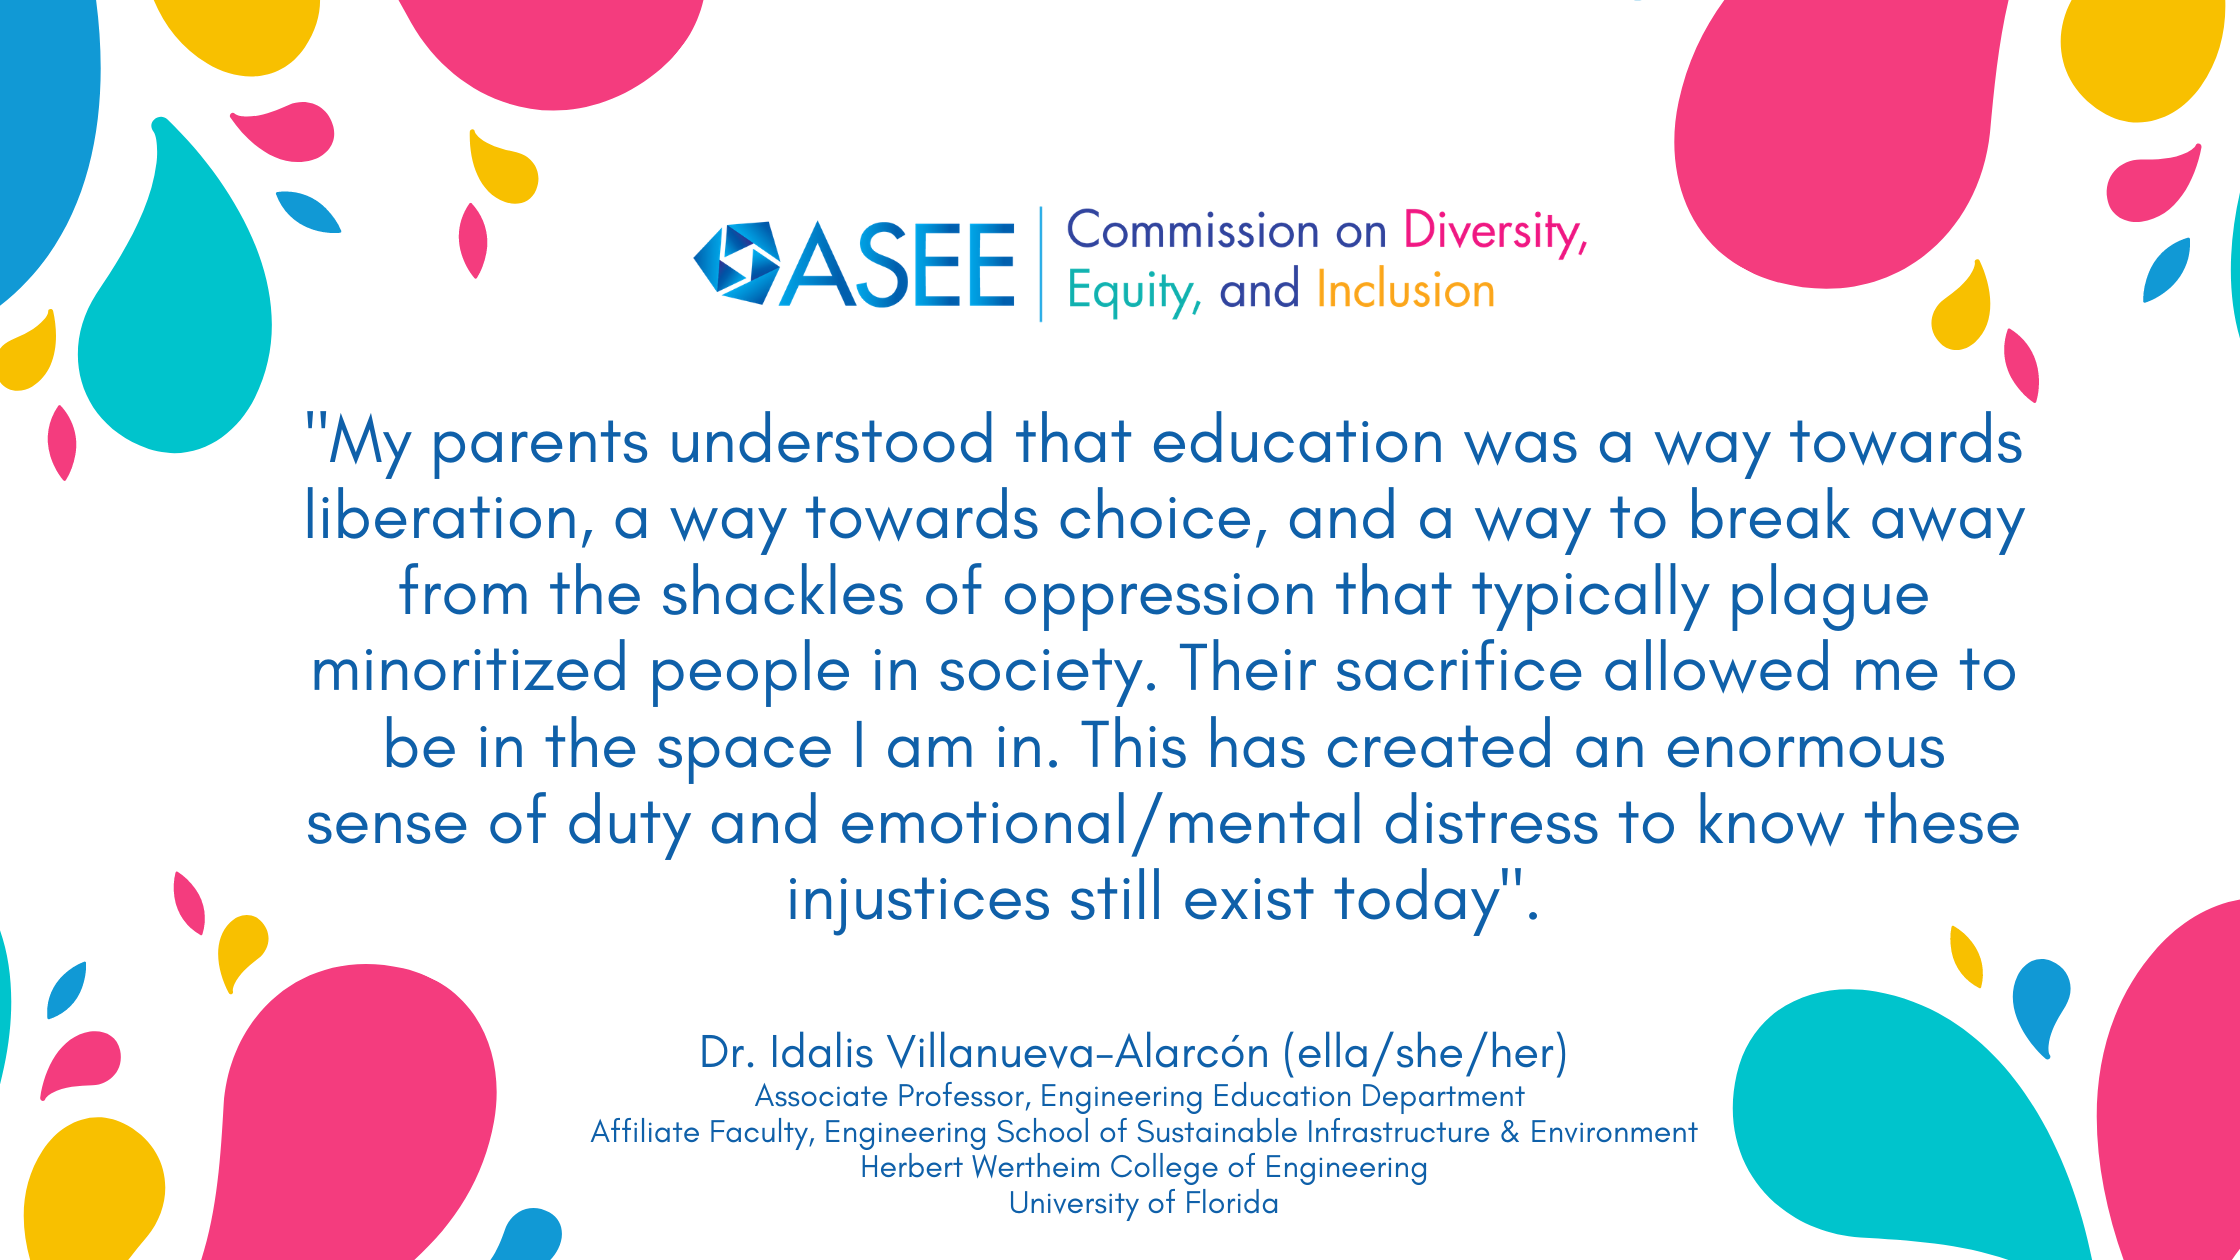 Quote: My parents understood that education was a way towards liberation, a way towards choice, and a way to break away from the shackles of oppression that typically plague minoritized people in society. Their sacrifice allowed me to be in the space I am in. This has created an enormous sense of duty and emotional/mental distress to know these injustices still exist today.